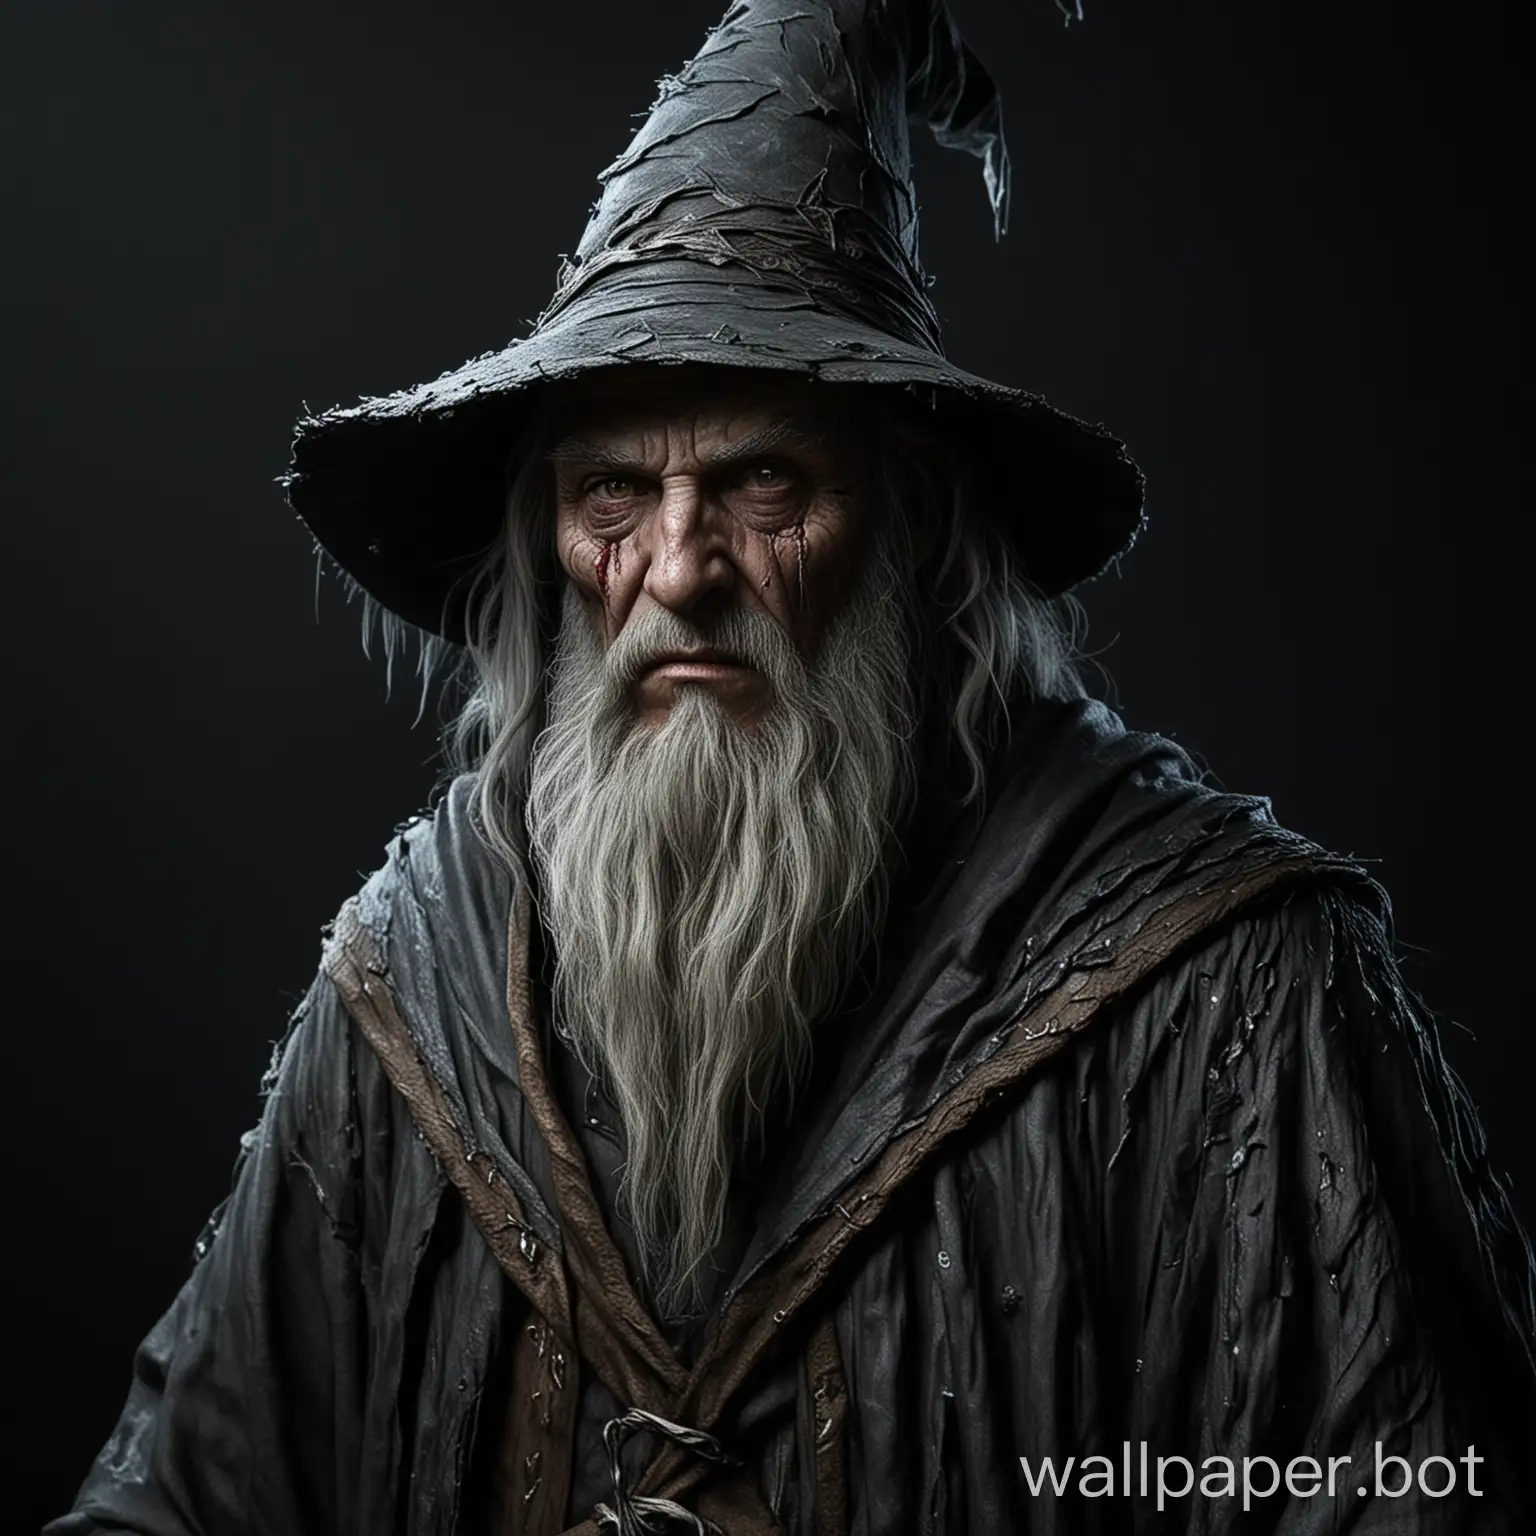 Scarred-Wizard-in-Fantasy-Setting-Against-Dark-Background